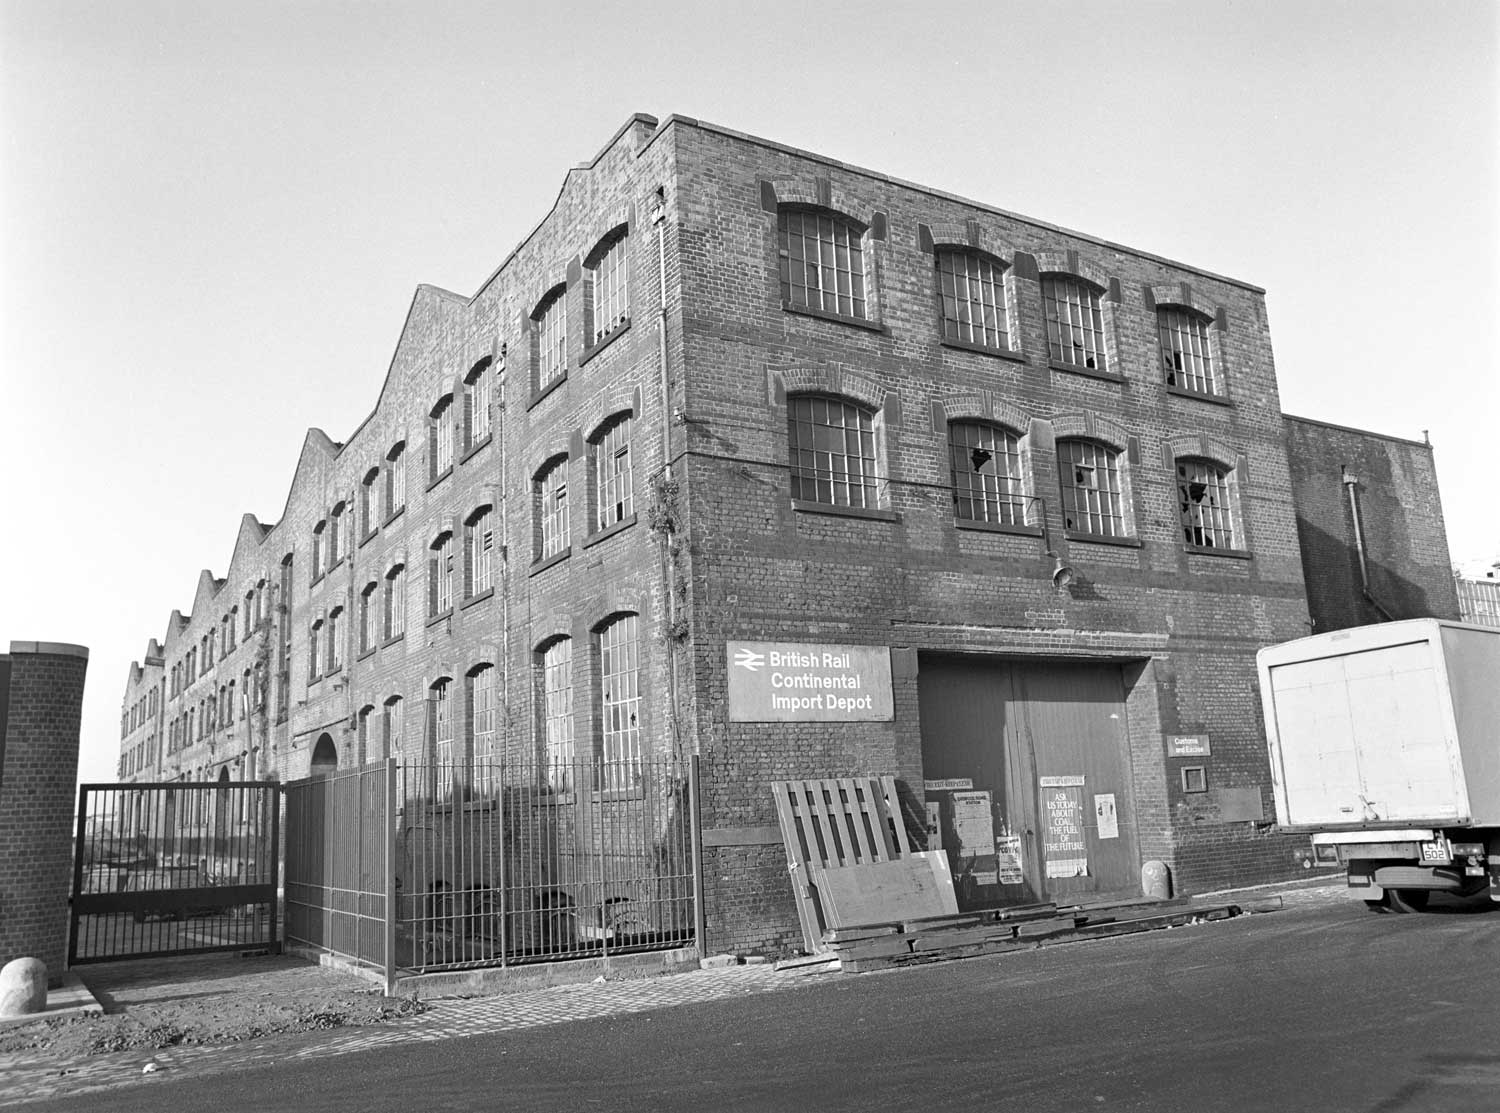 Black and white photo of a disused railway warehouse